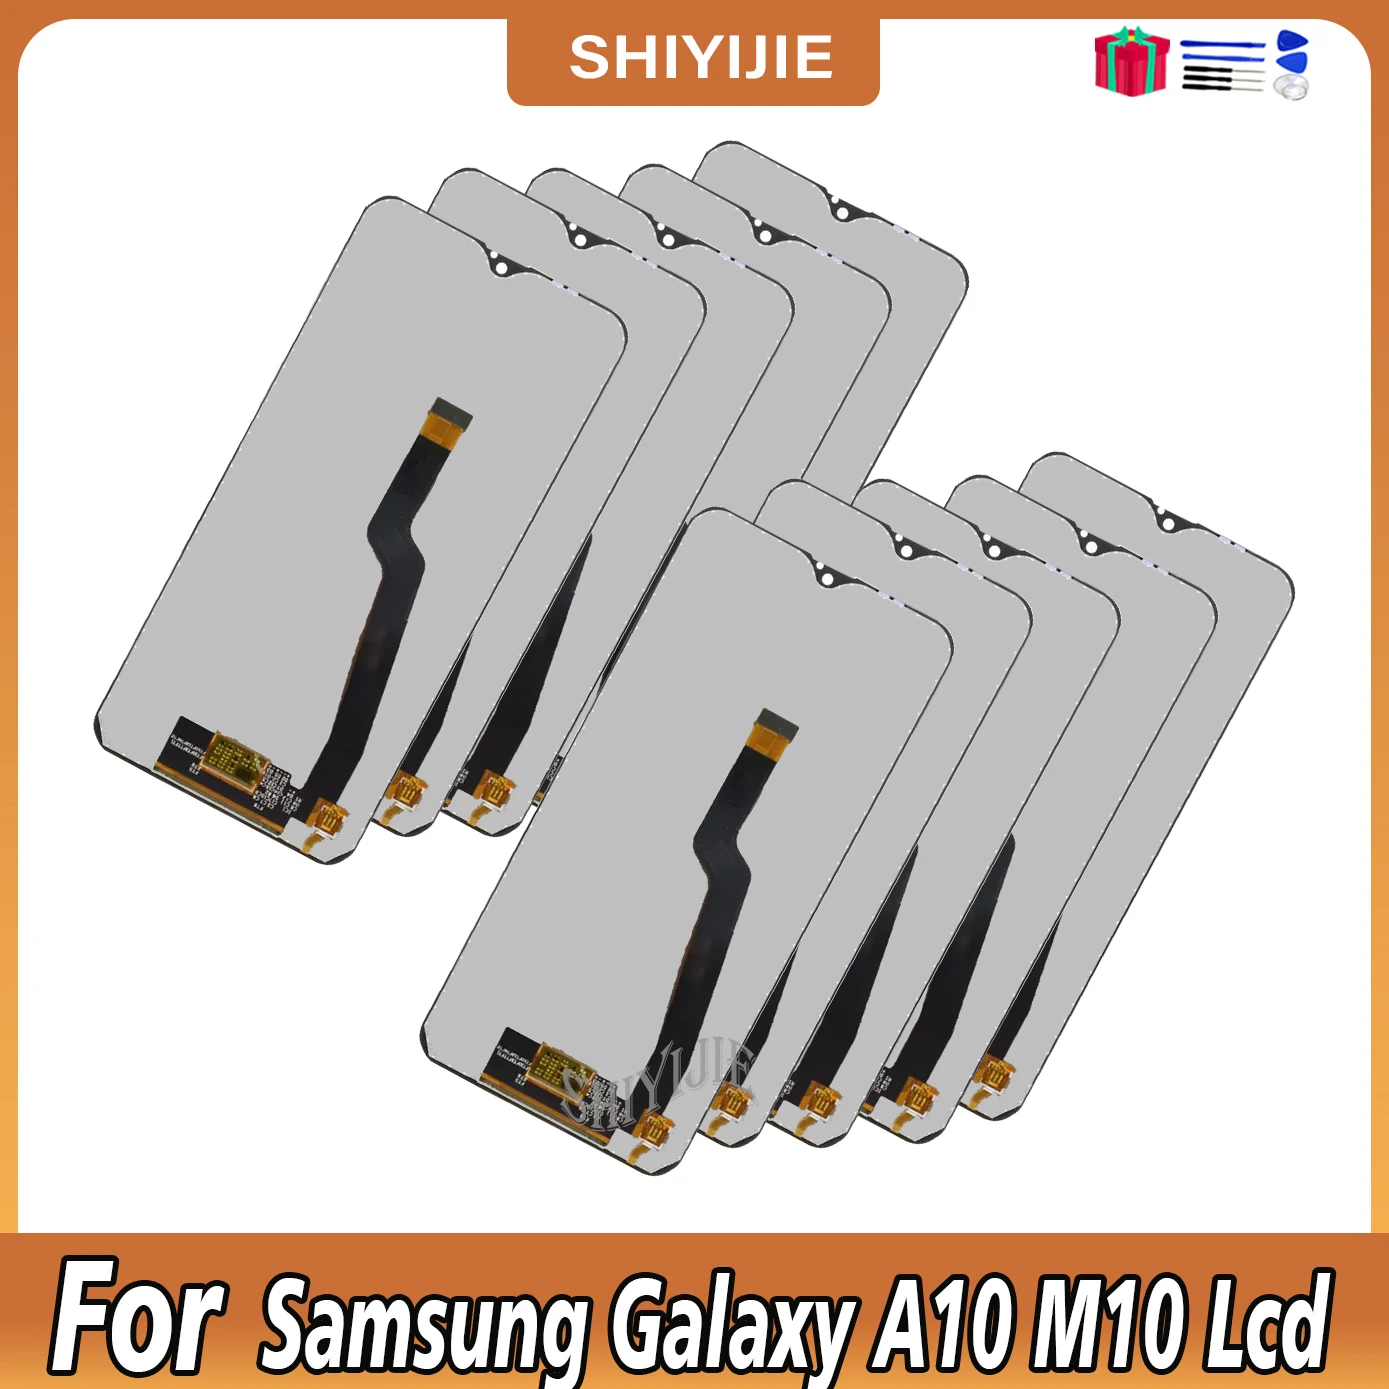 

10PCS/LOT AMOLED For Samsung galaxy A10 A105/DS A105F A105FD A105M M10 Lcd Display Touch Screen Digitizer Display Digitizer